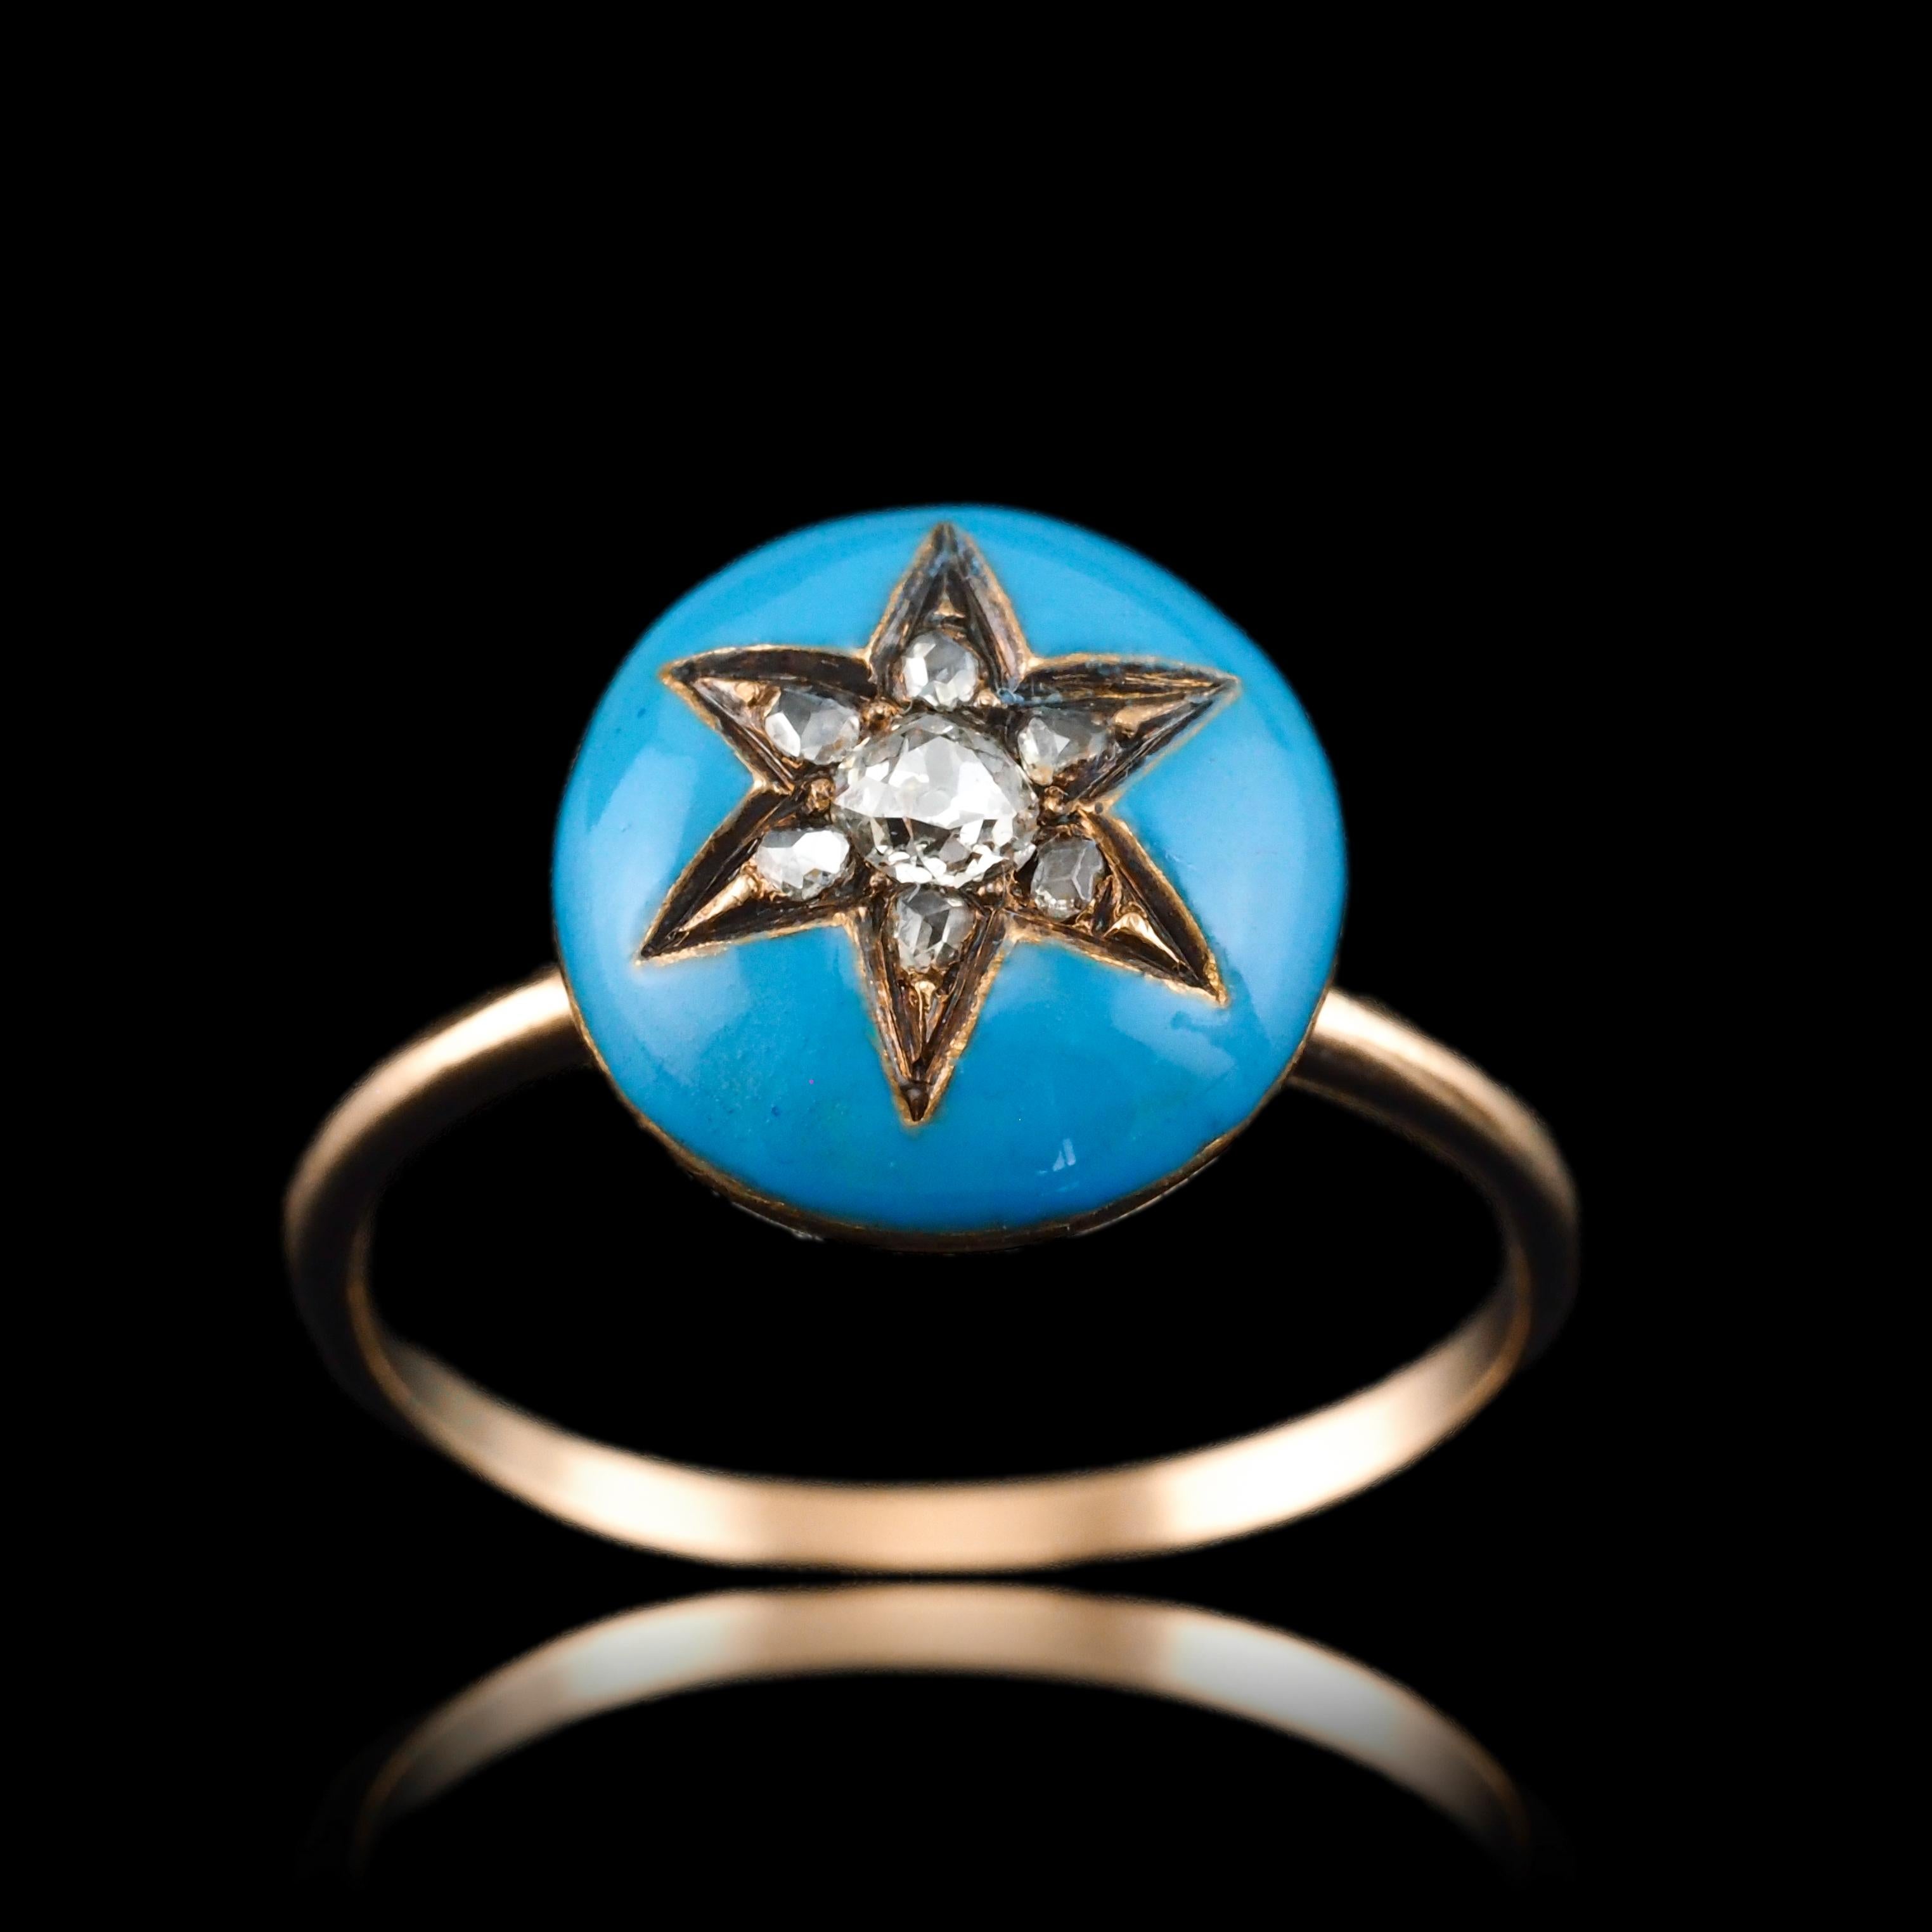 We are delighted to offer this stunning antique Victorian diamond star and blue enamel ring made c.1890.
  
Unapologetically Victorian, this ring features some of the most desirable and stylish elements of the period. The light blue enamel remains